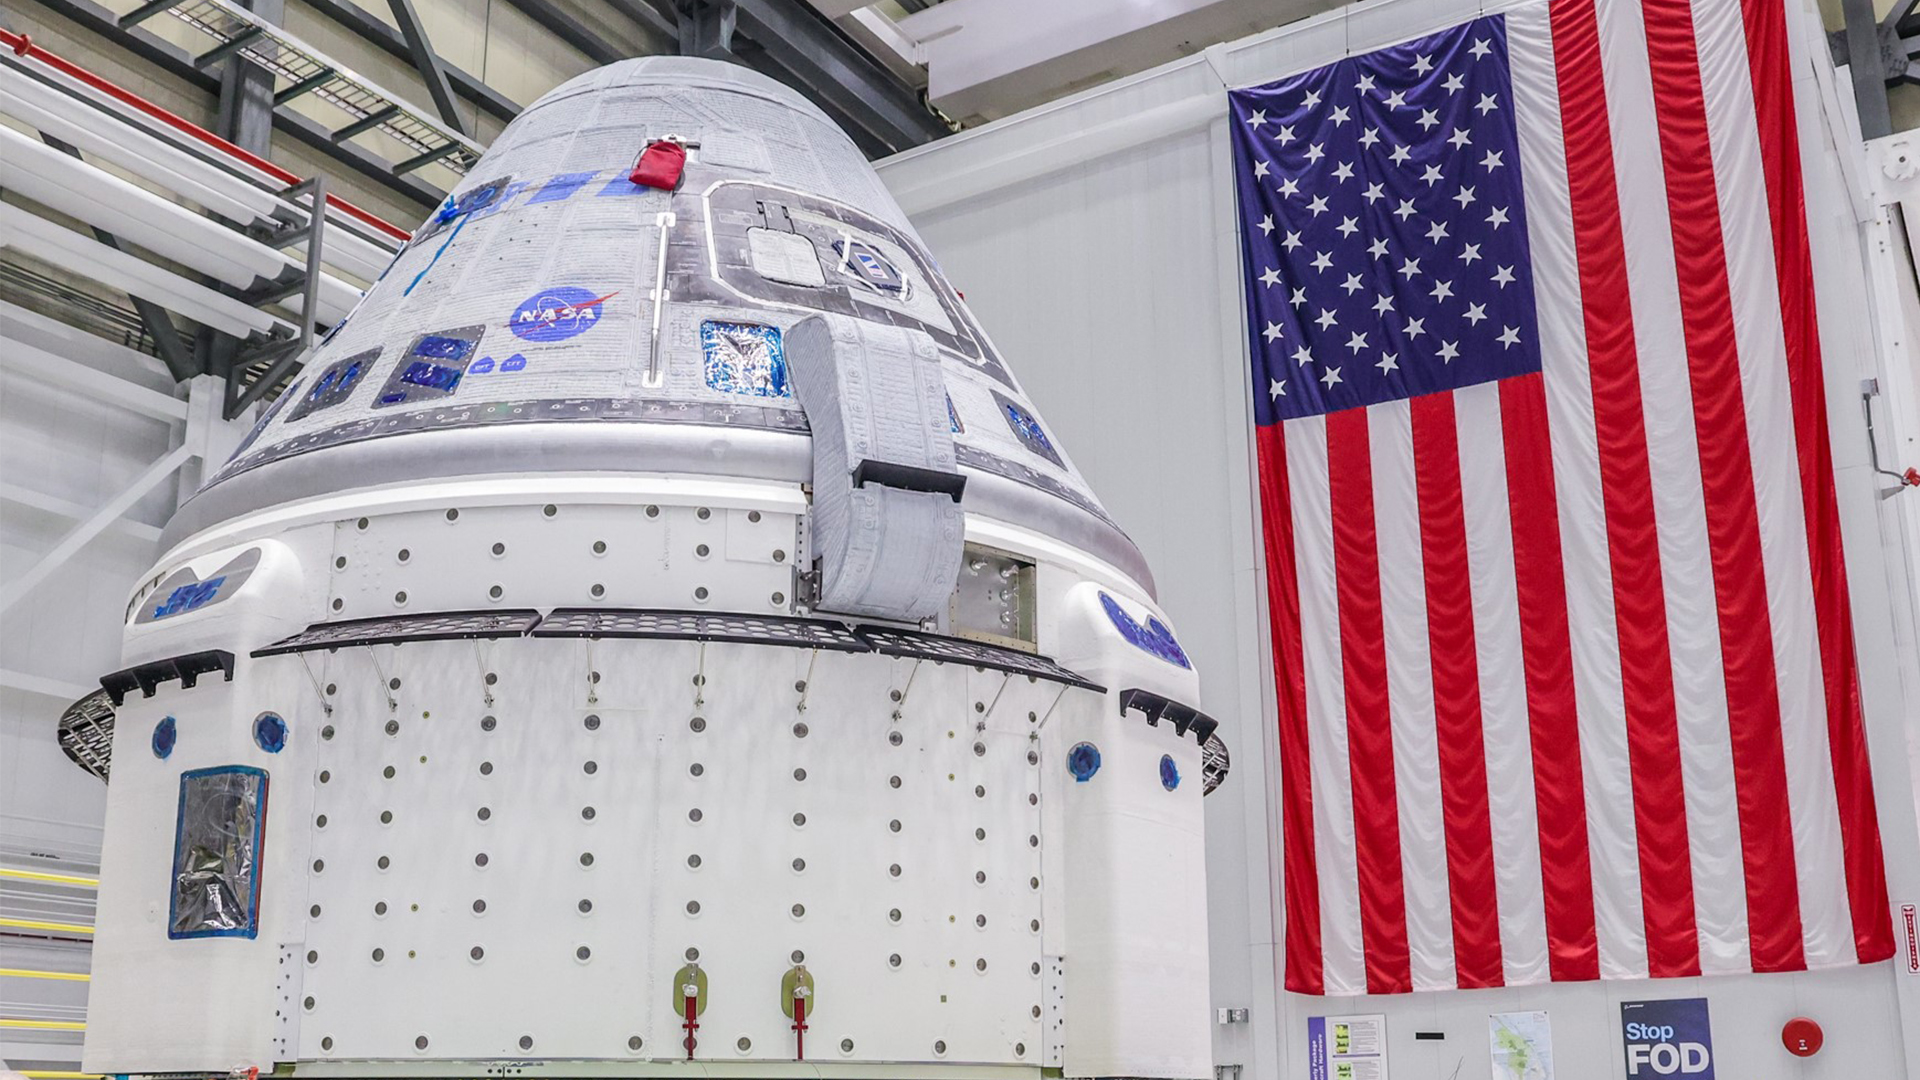 Boeing’s Starliner capsule still on track for mid-April astronaut launch to ISS Space